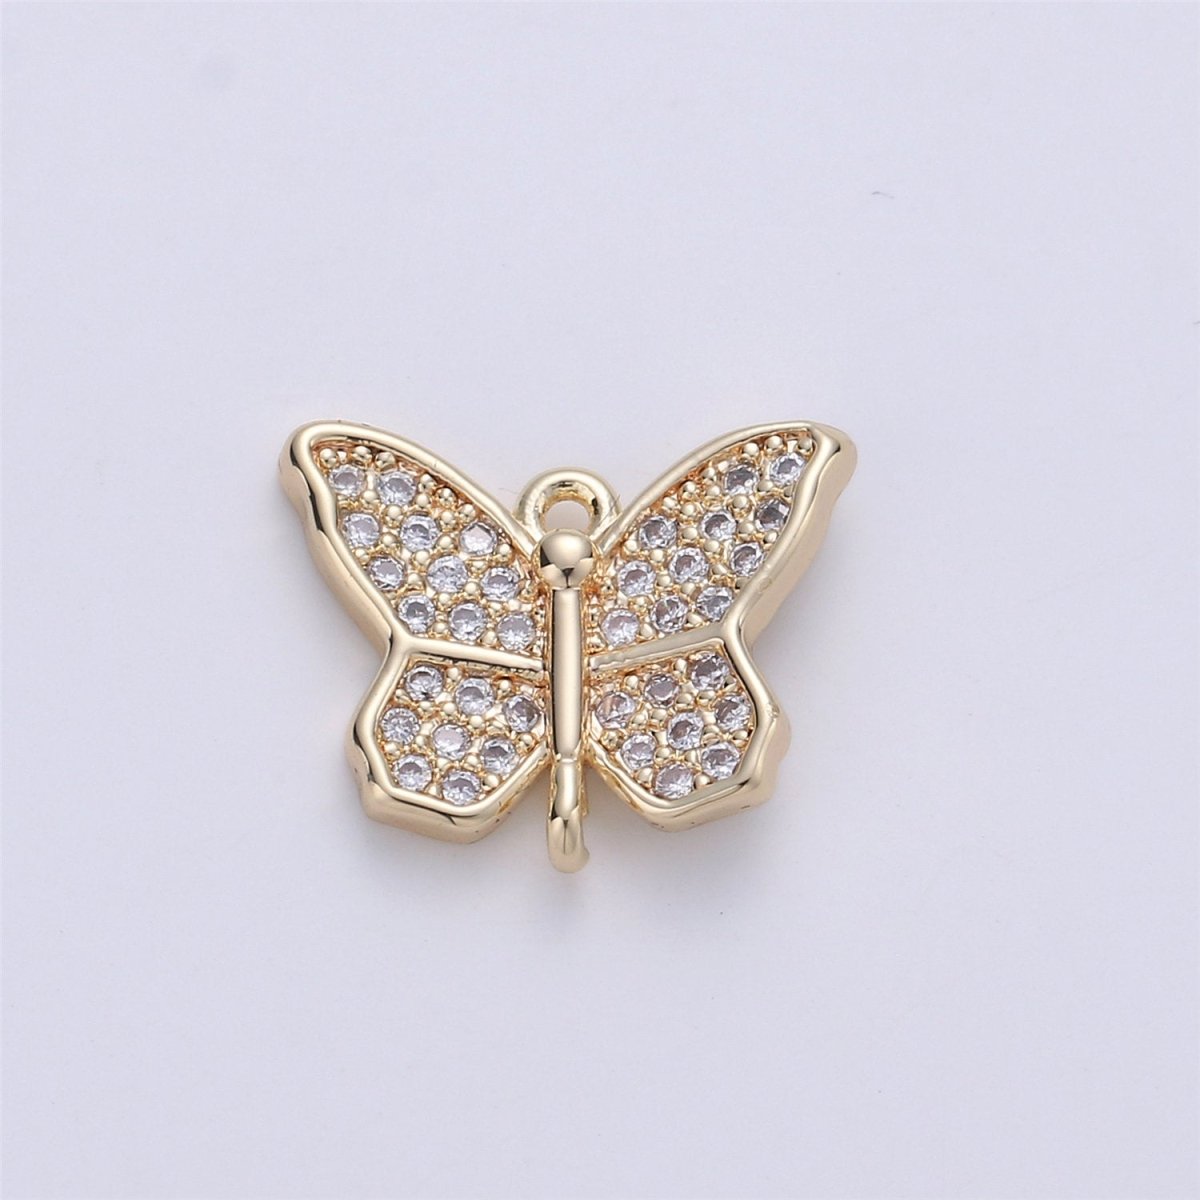 Dainty 14k Gold Filled Mariposa Butterfly Pendant for Necklace Bracelet Earring Charm Supply Component D-063 - DLUXCA